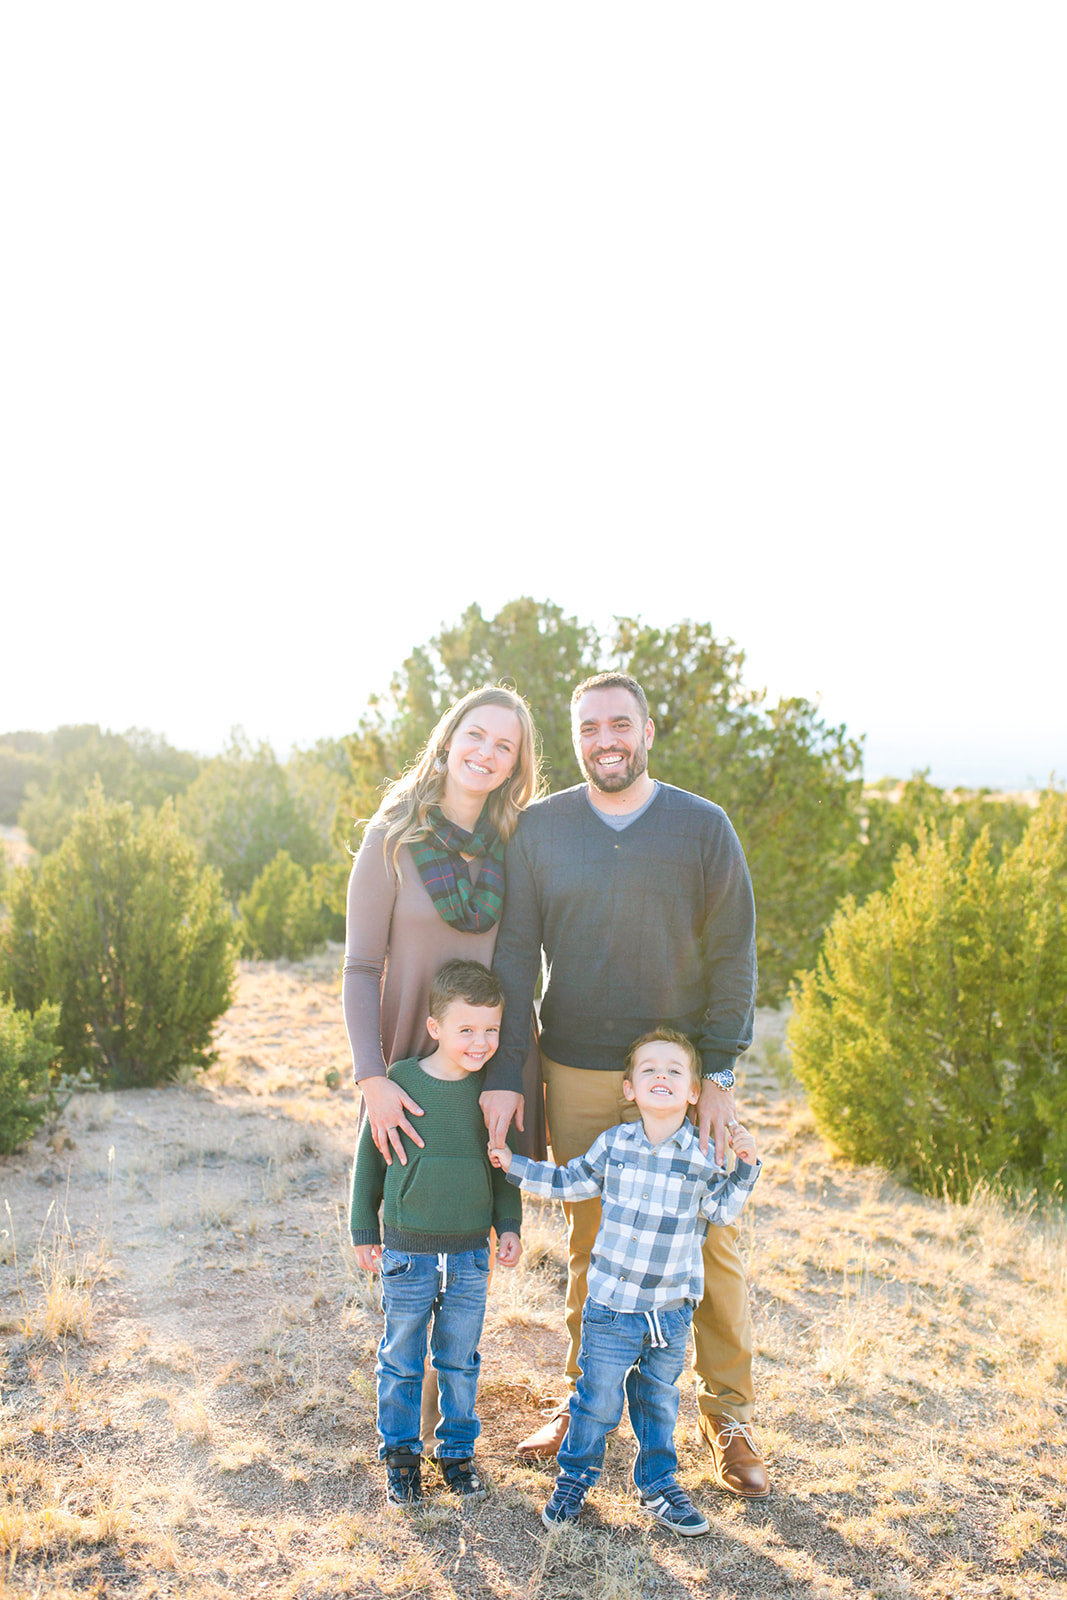 Albuquerque Family Photography_Foothills_www.tylerbrooke.com_Kate Kauffman_003